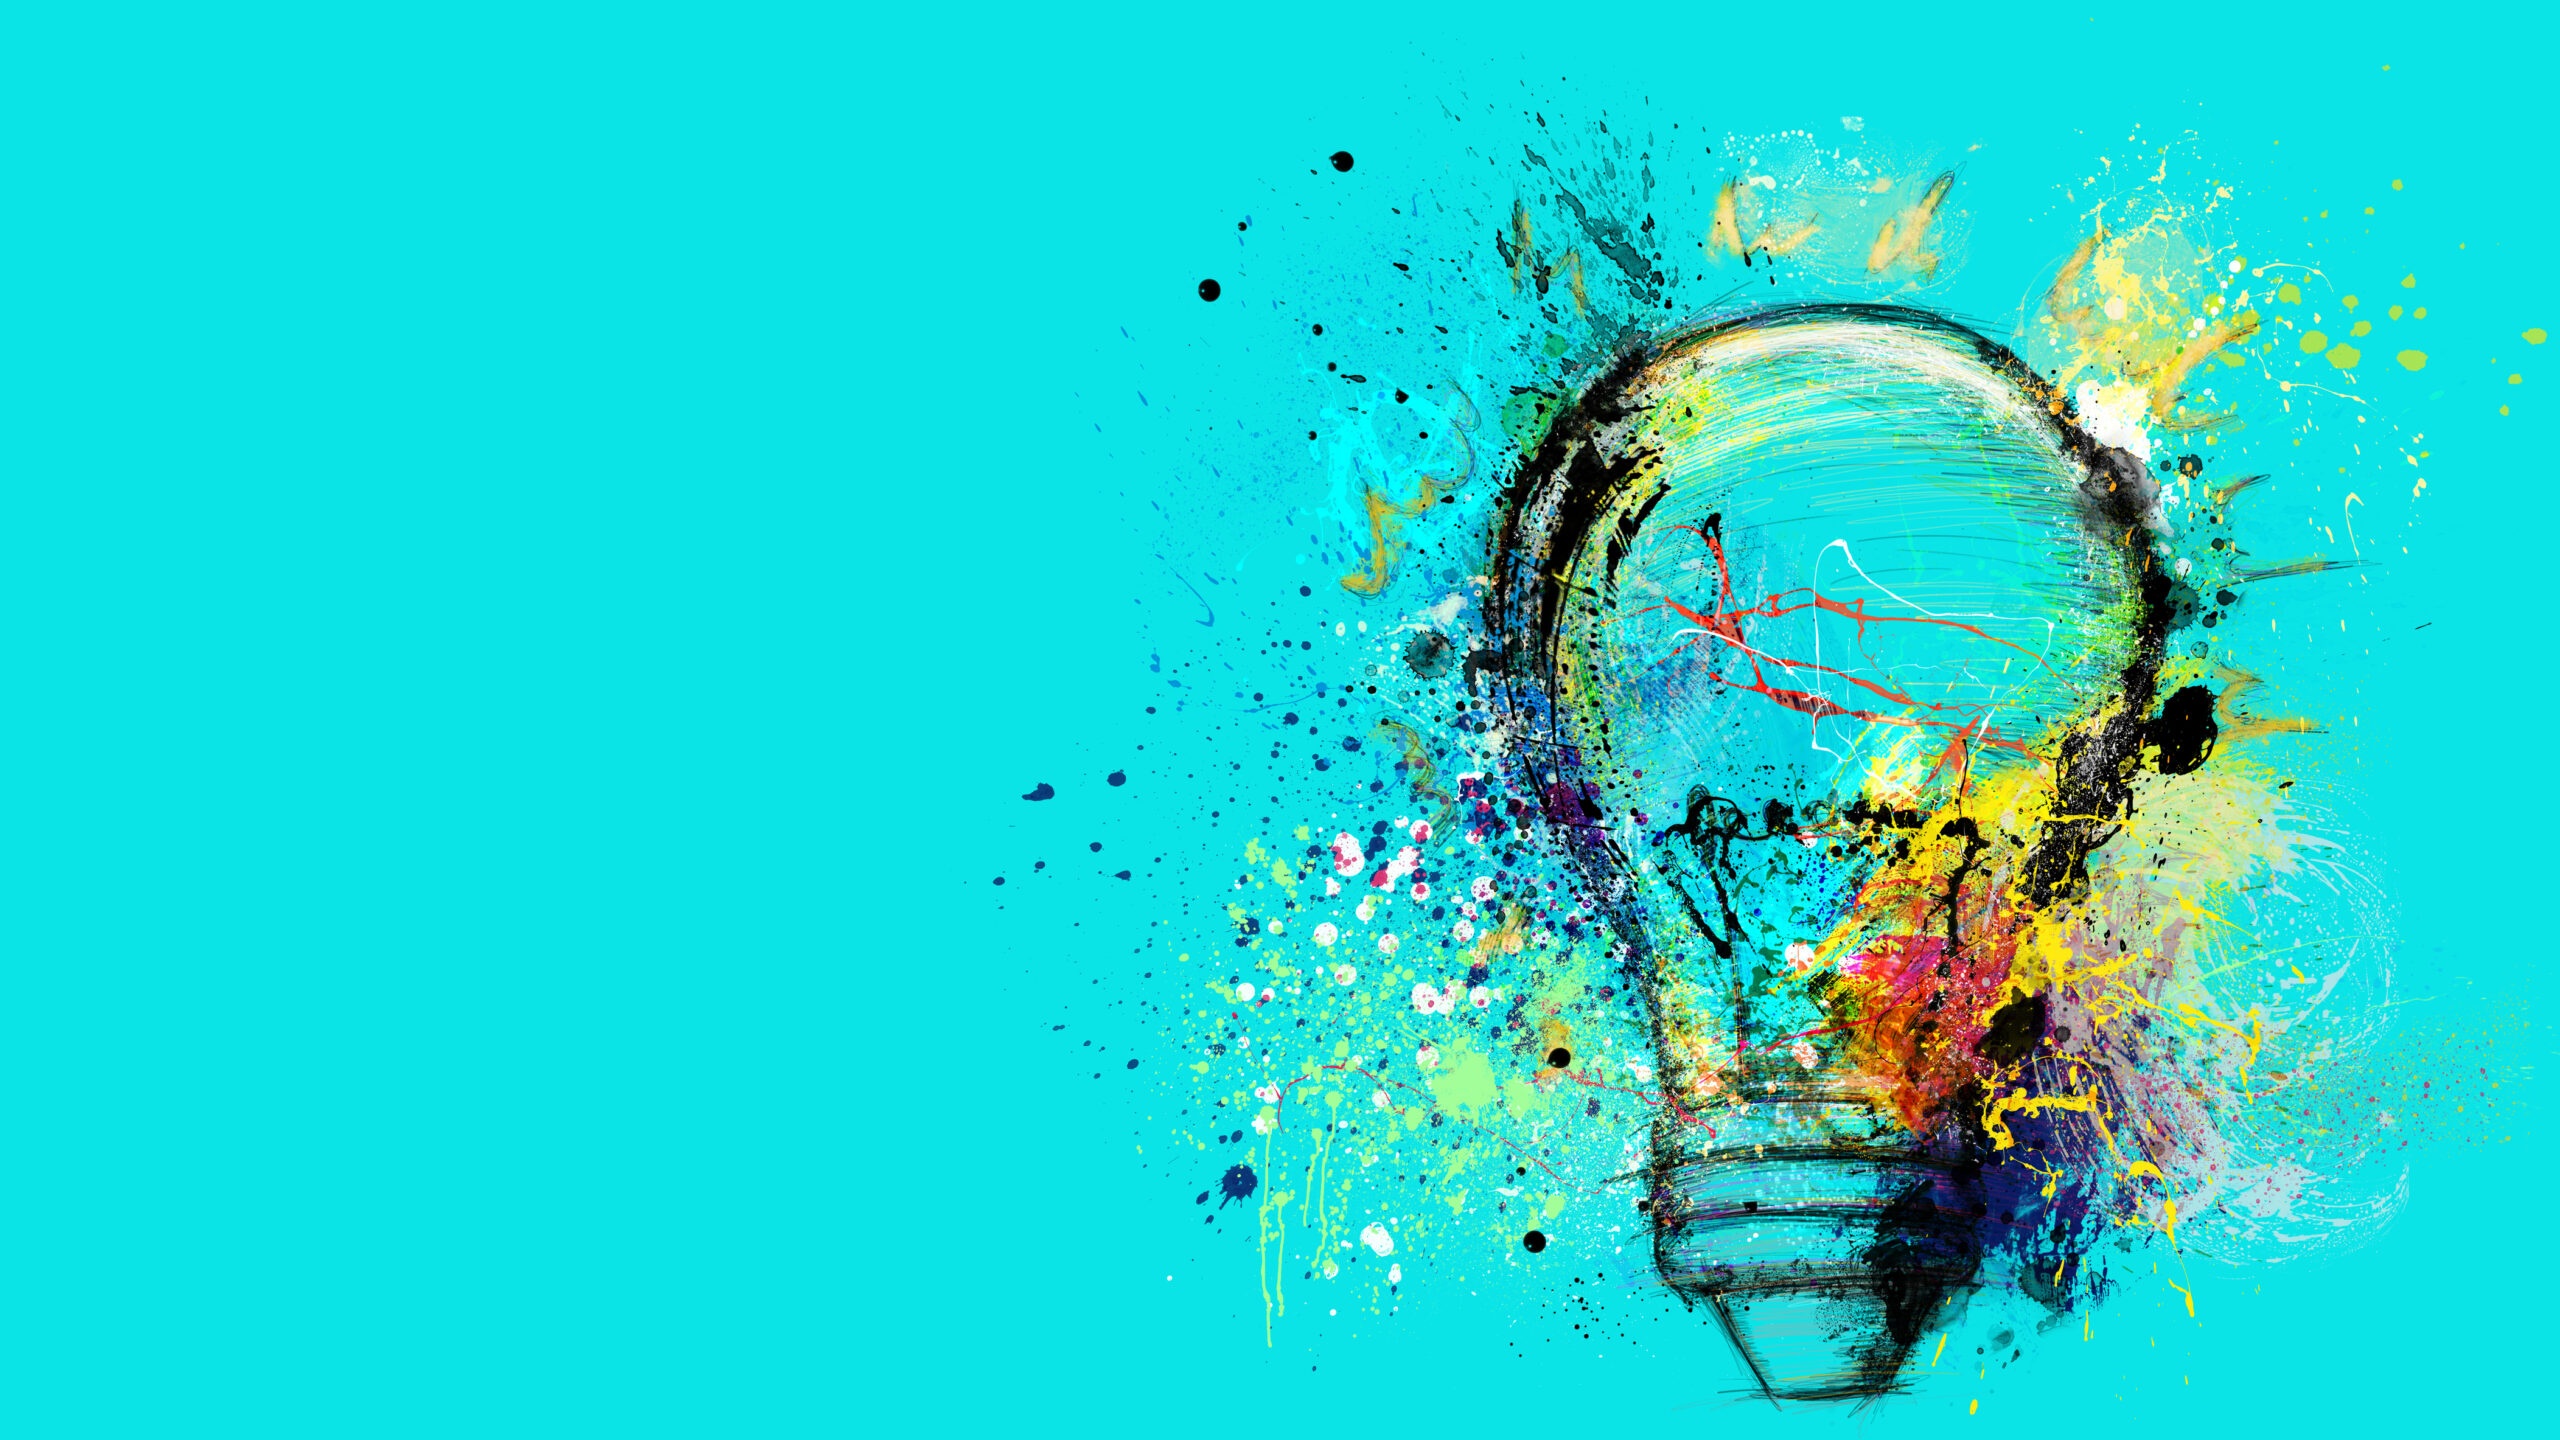 lightbulb full of colors in a blue background, image of new podcast episode of Harvesting Happiness Talk Radio about the creative mind with Eric Maisel & R. Douglas Fields